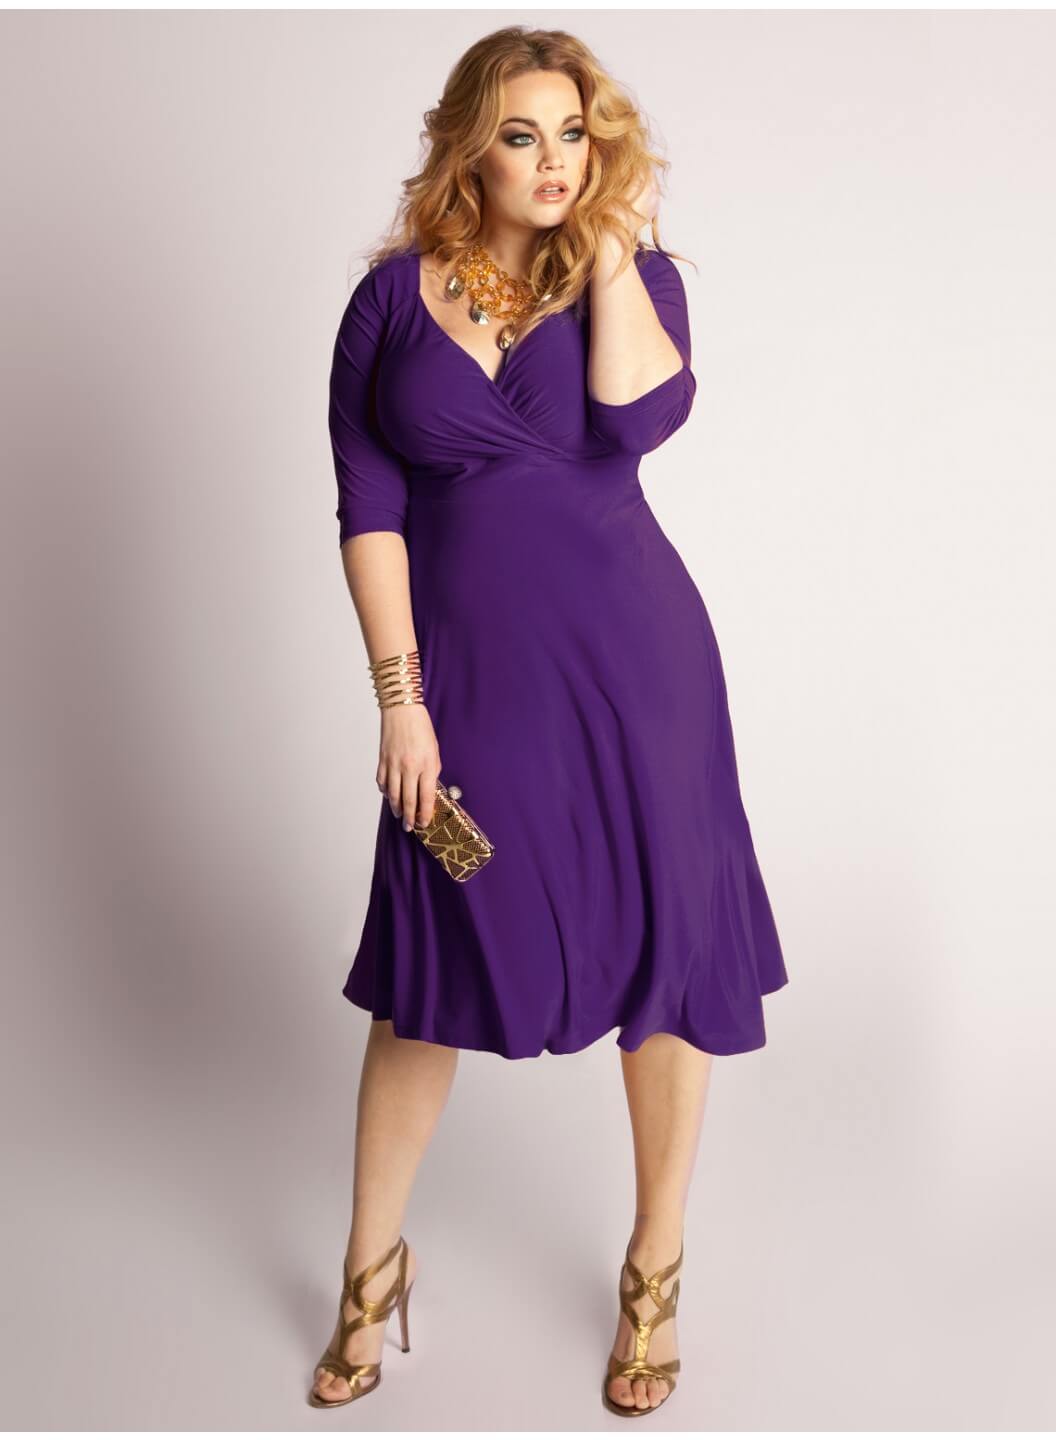 How to Pick the Best in Sexy Club Plus Size Dresses - Trendy Dresses